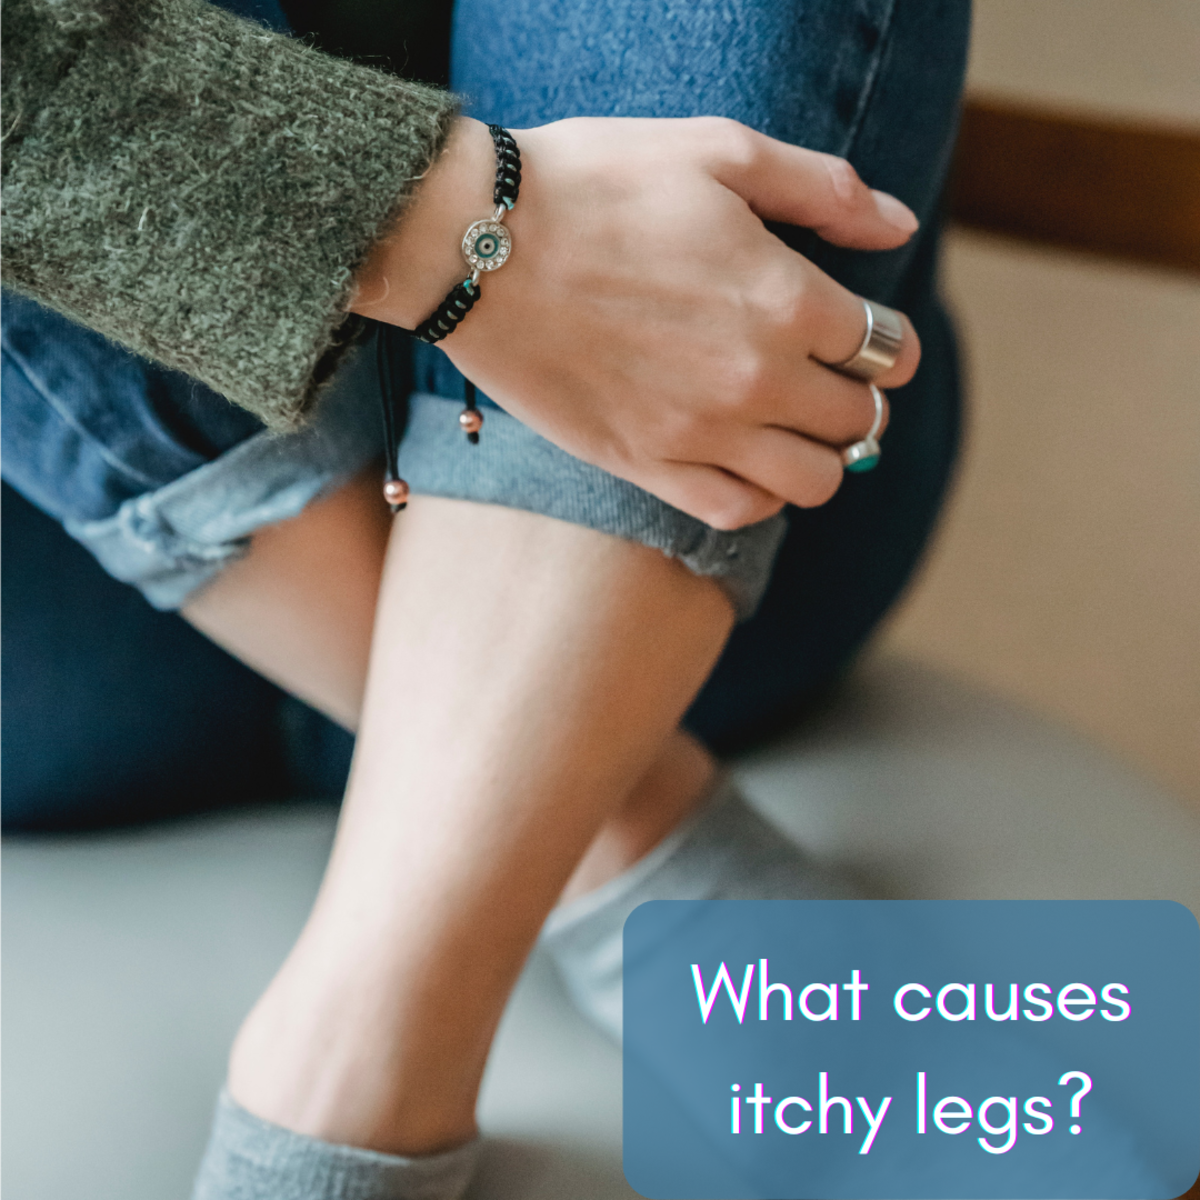 12 Causes of Itchy Legs (Including Photos and Remedies)